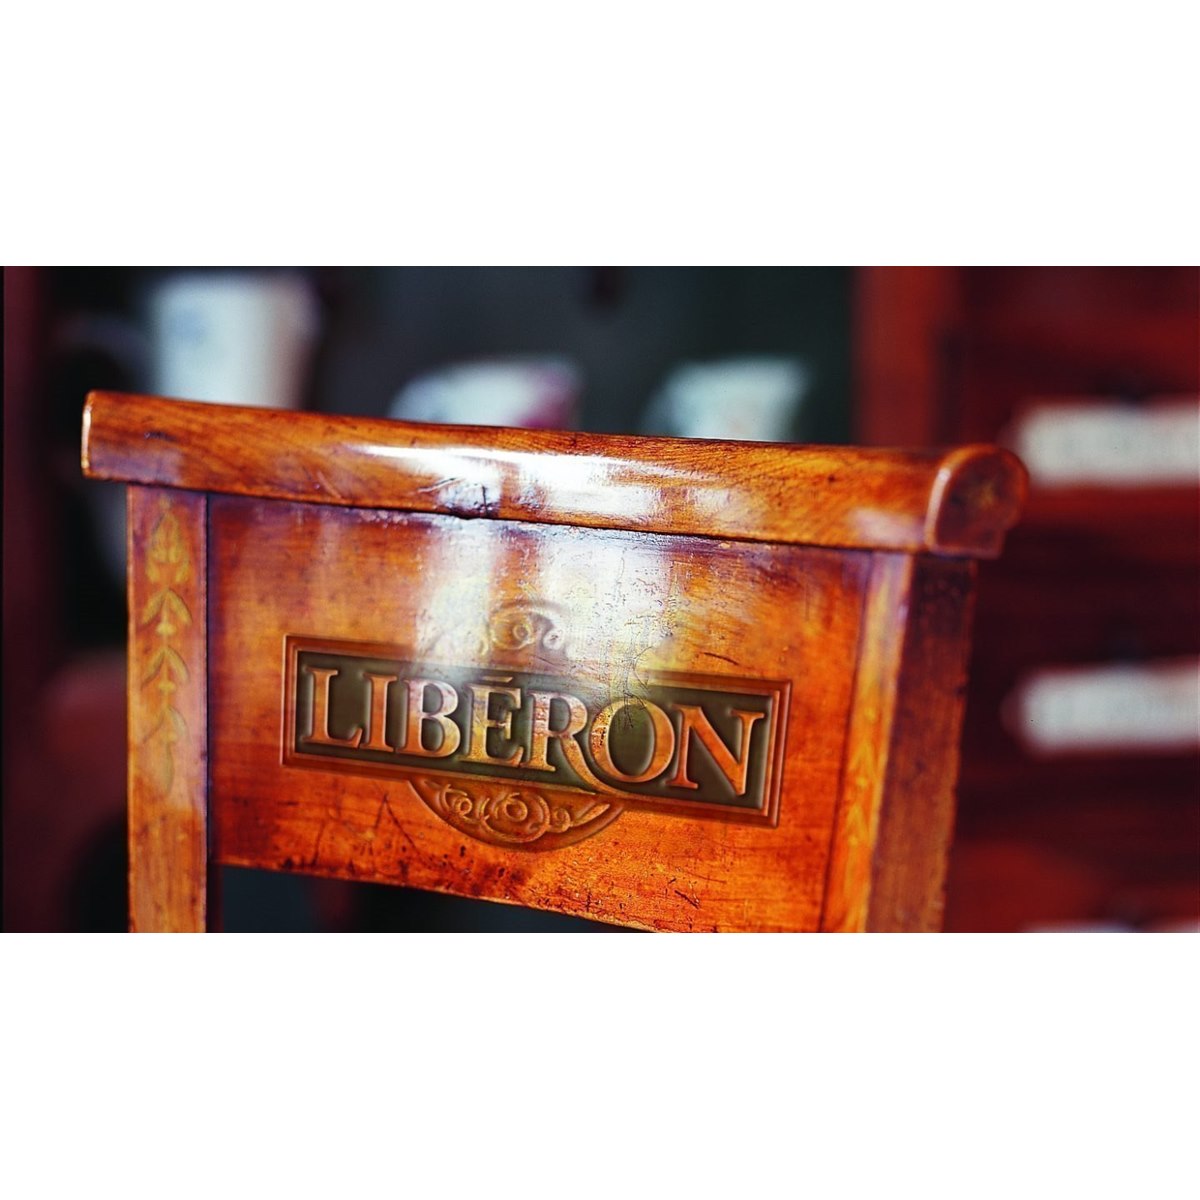 Where to Buy Liberon Woodcare Products